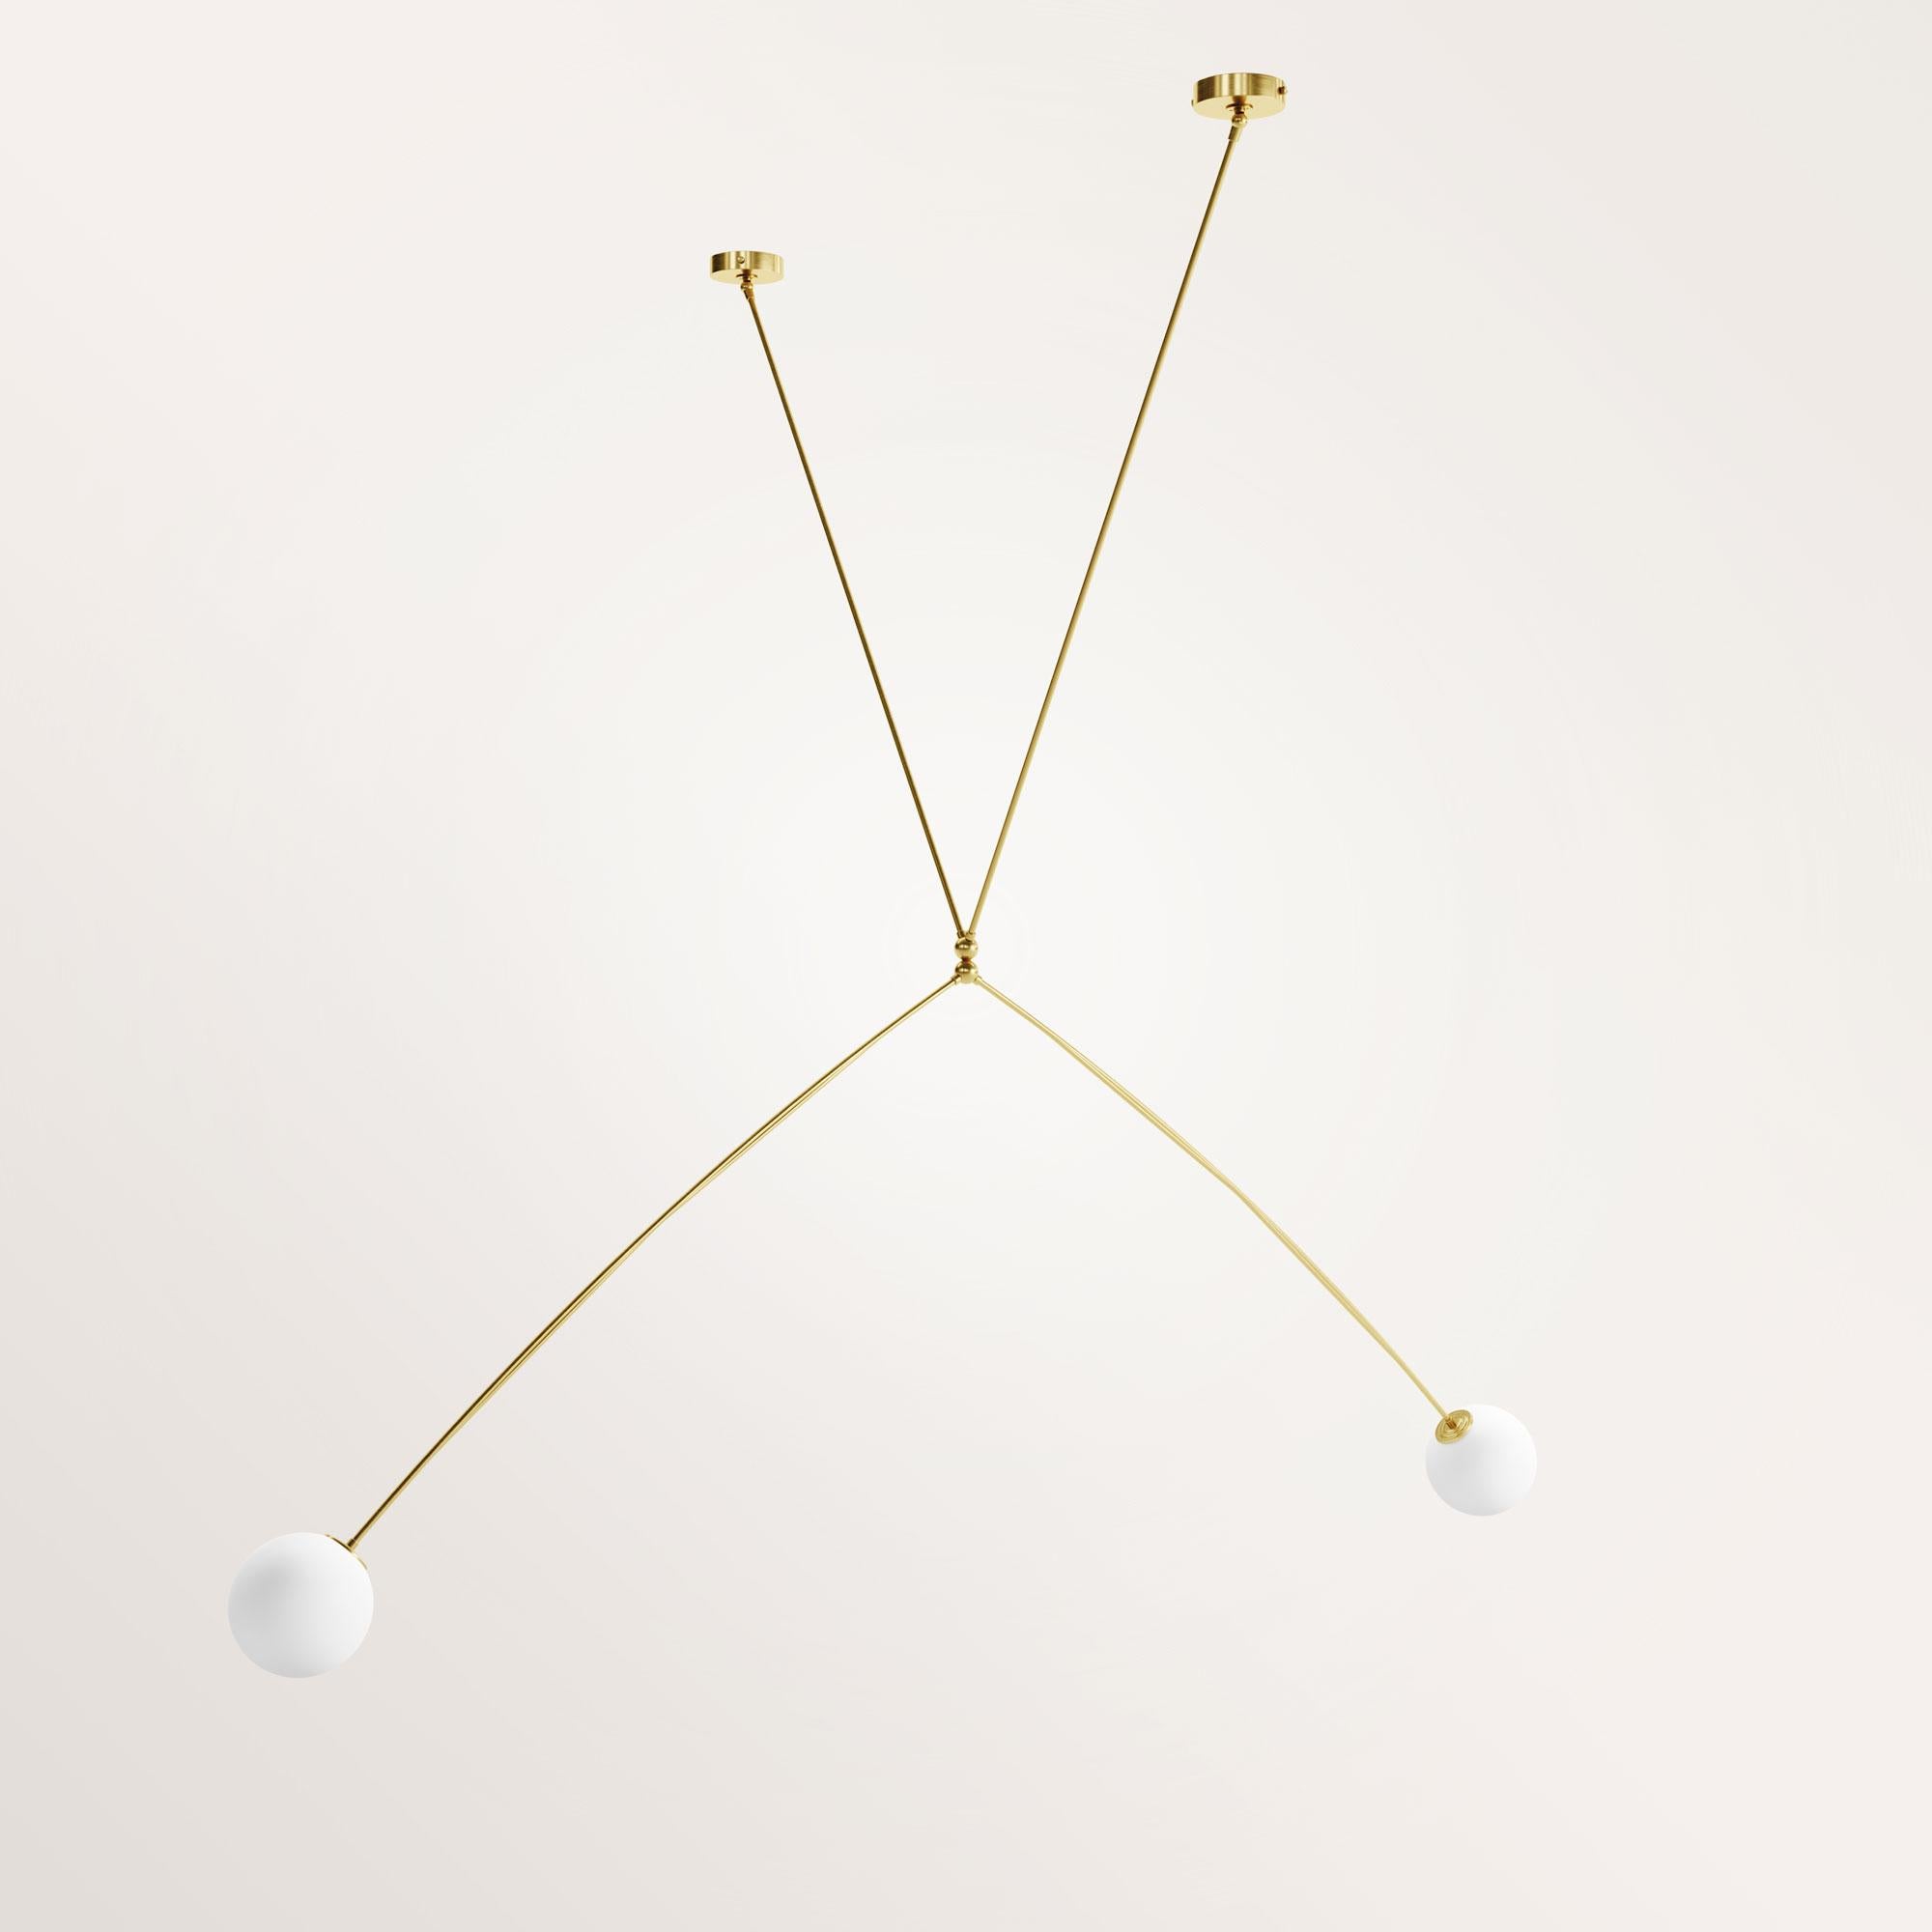 Handmade Athos chandelier by Gobo Lights
Dimensions: 190 L X 110 L X 170 H
Materials: Brass, Opaline

This lamp takes the shape of the bow used by Artemis, the goddess of the hunt.

Self-taught and from the world of chemistry, this Belgian